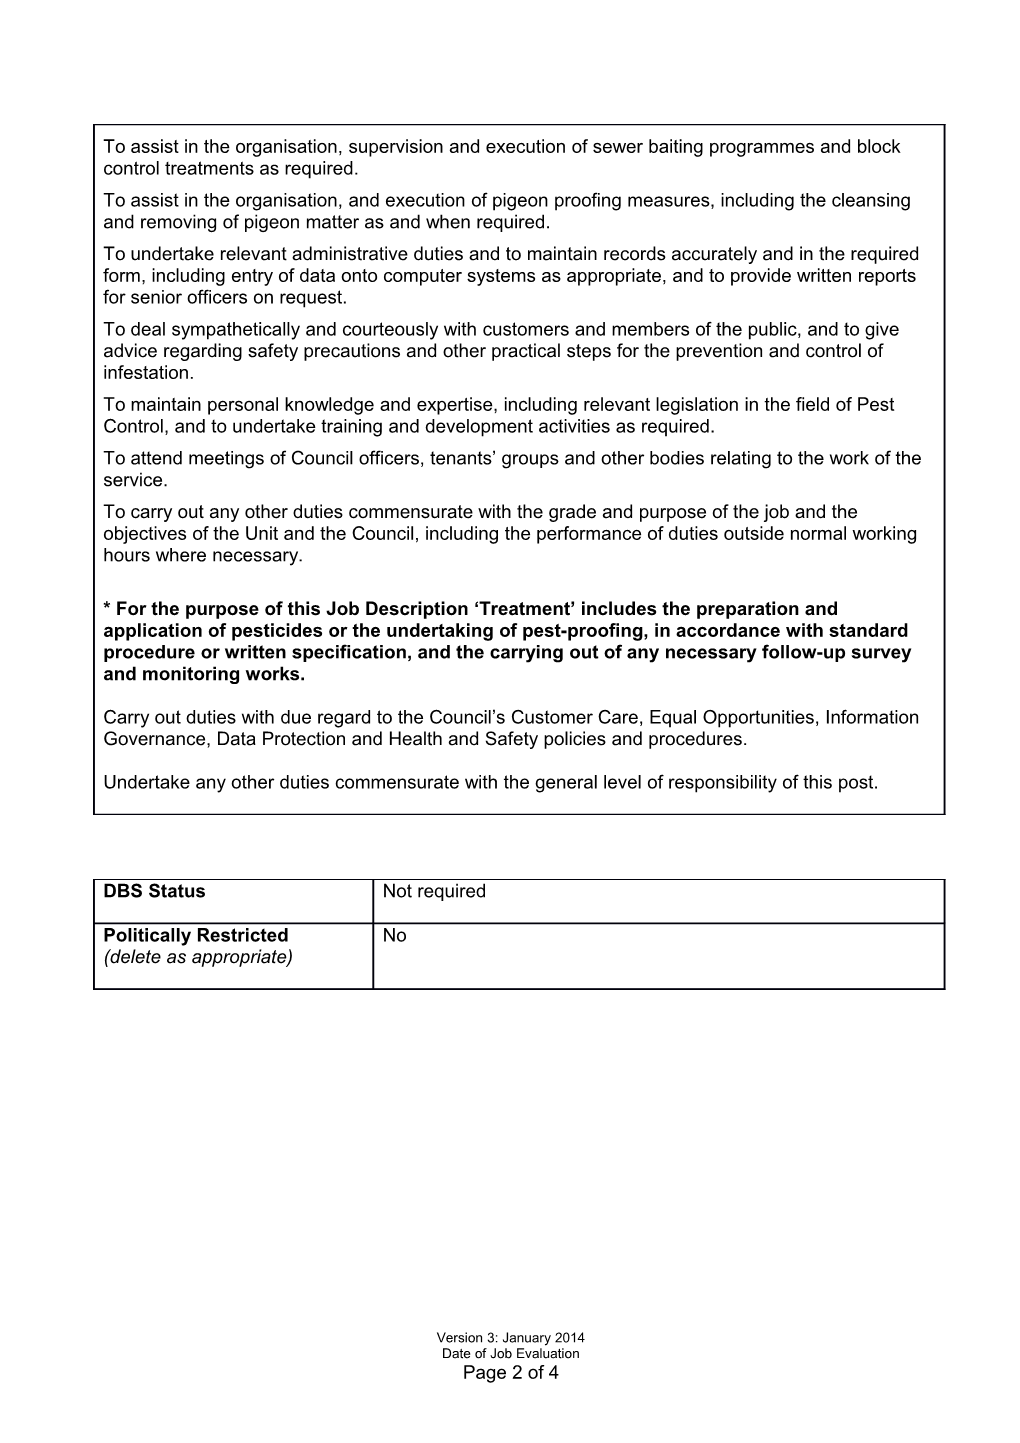 Application for Job Evaluation s4